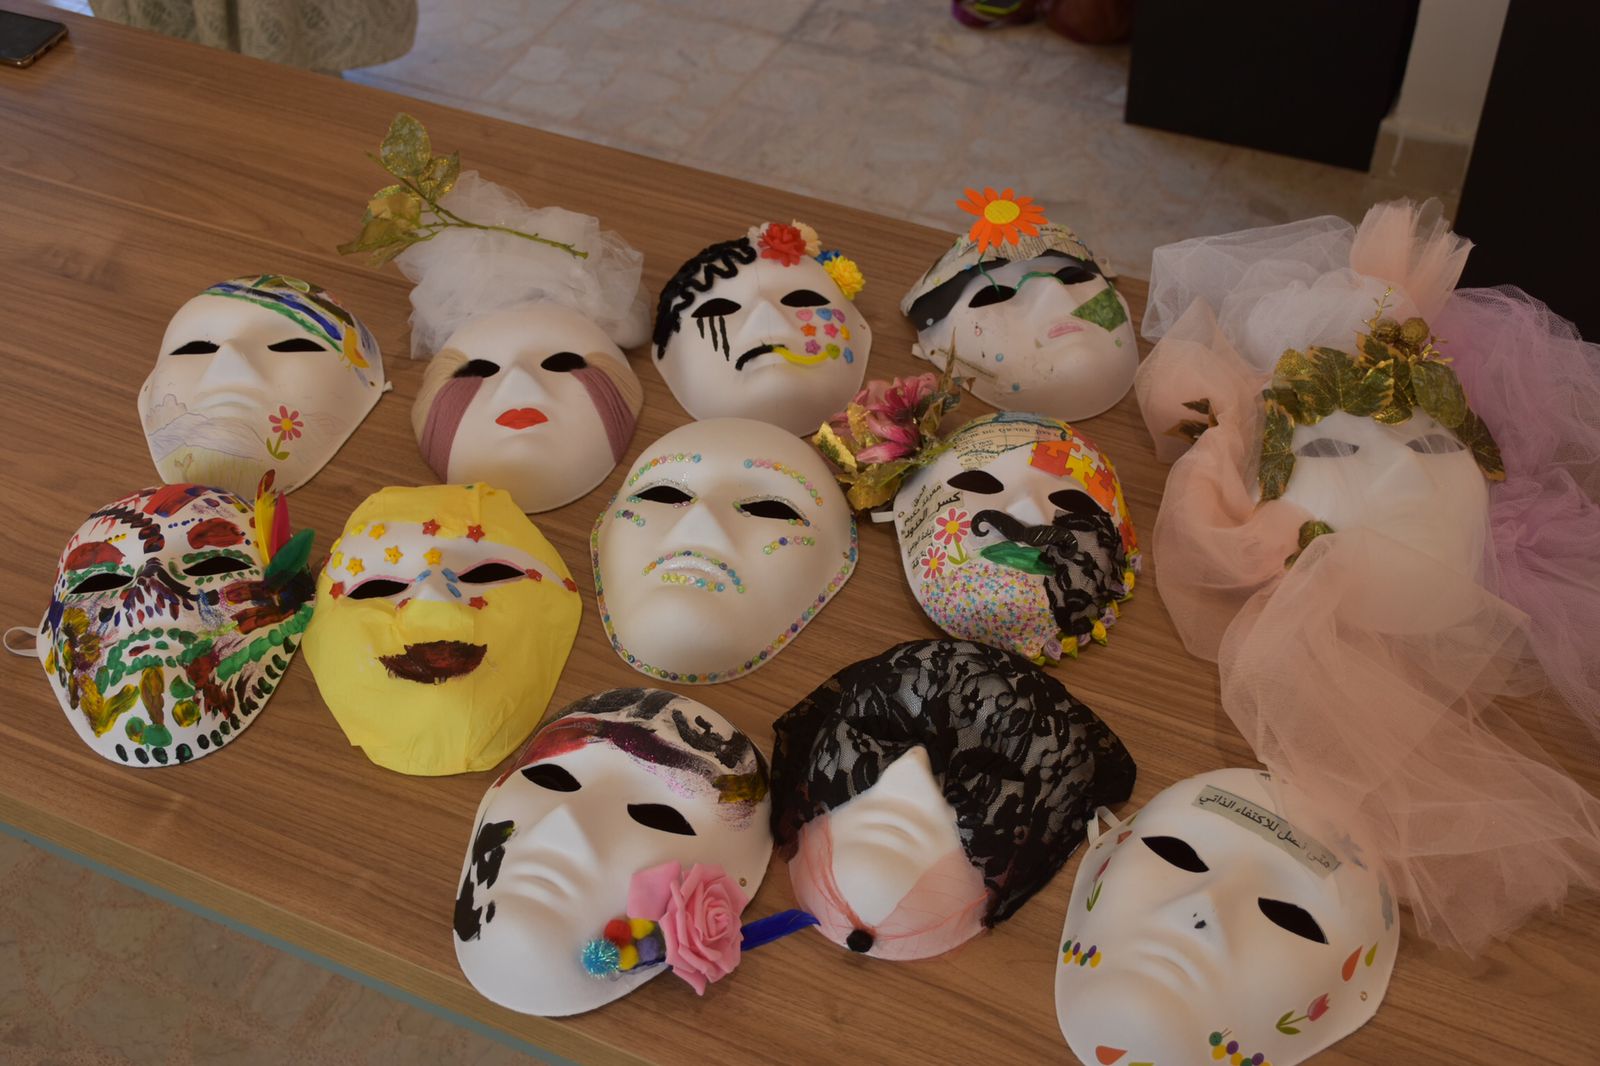 Participants in the workshop made colorful masks to reflect on identity and social support.